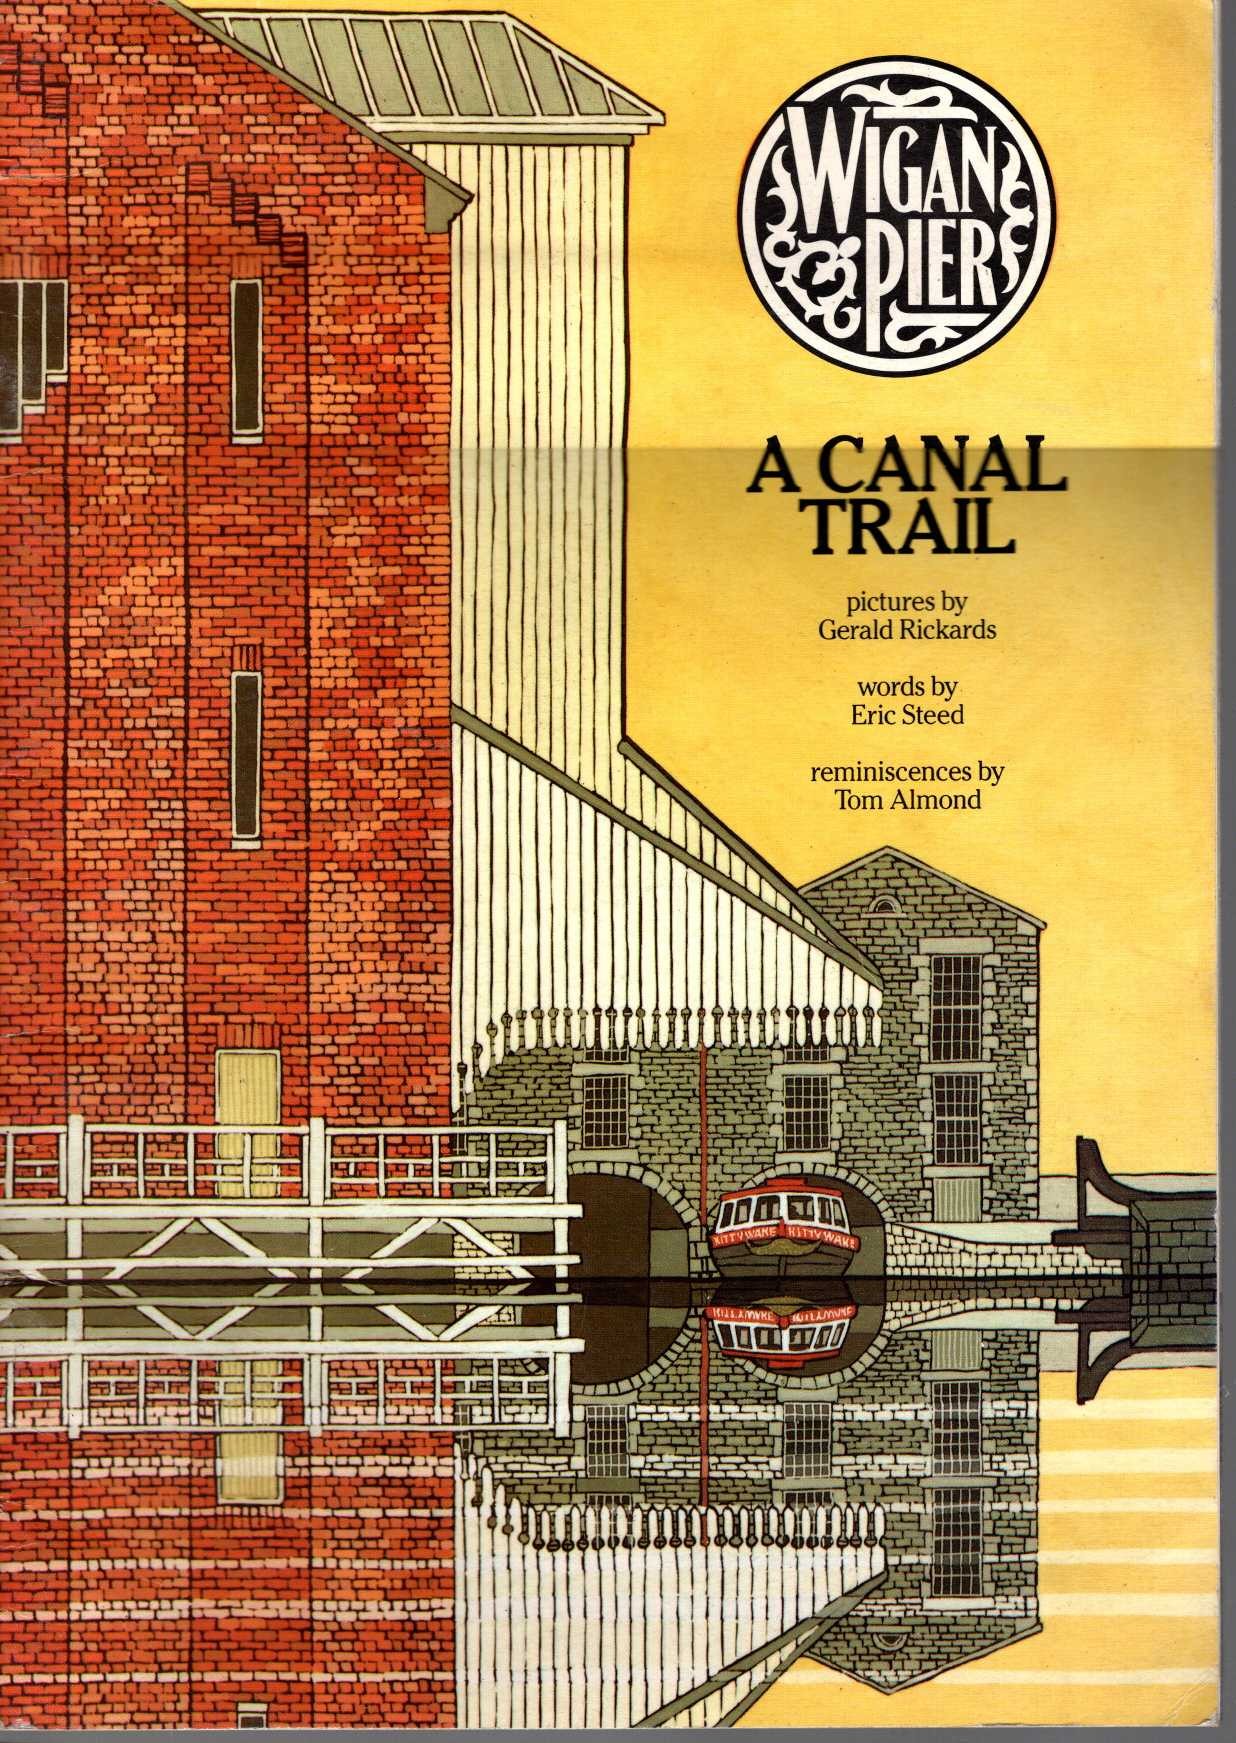 \ WIGAN PIER - A CANAL TRAIL by Eric Steed & Tom Almond front book cover image